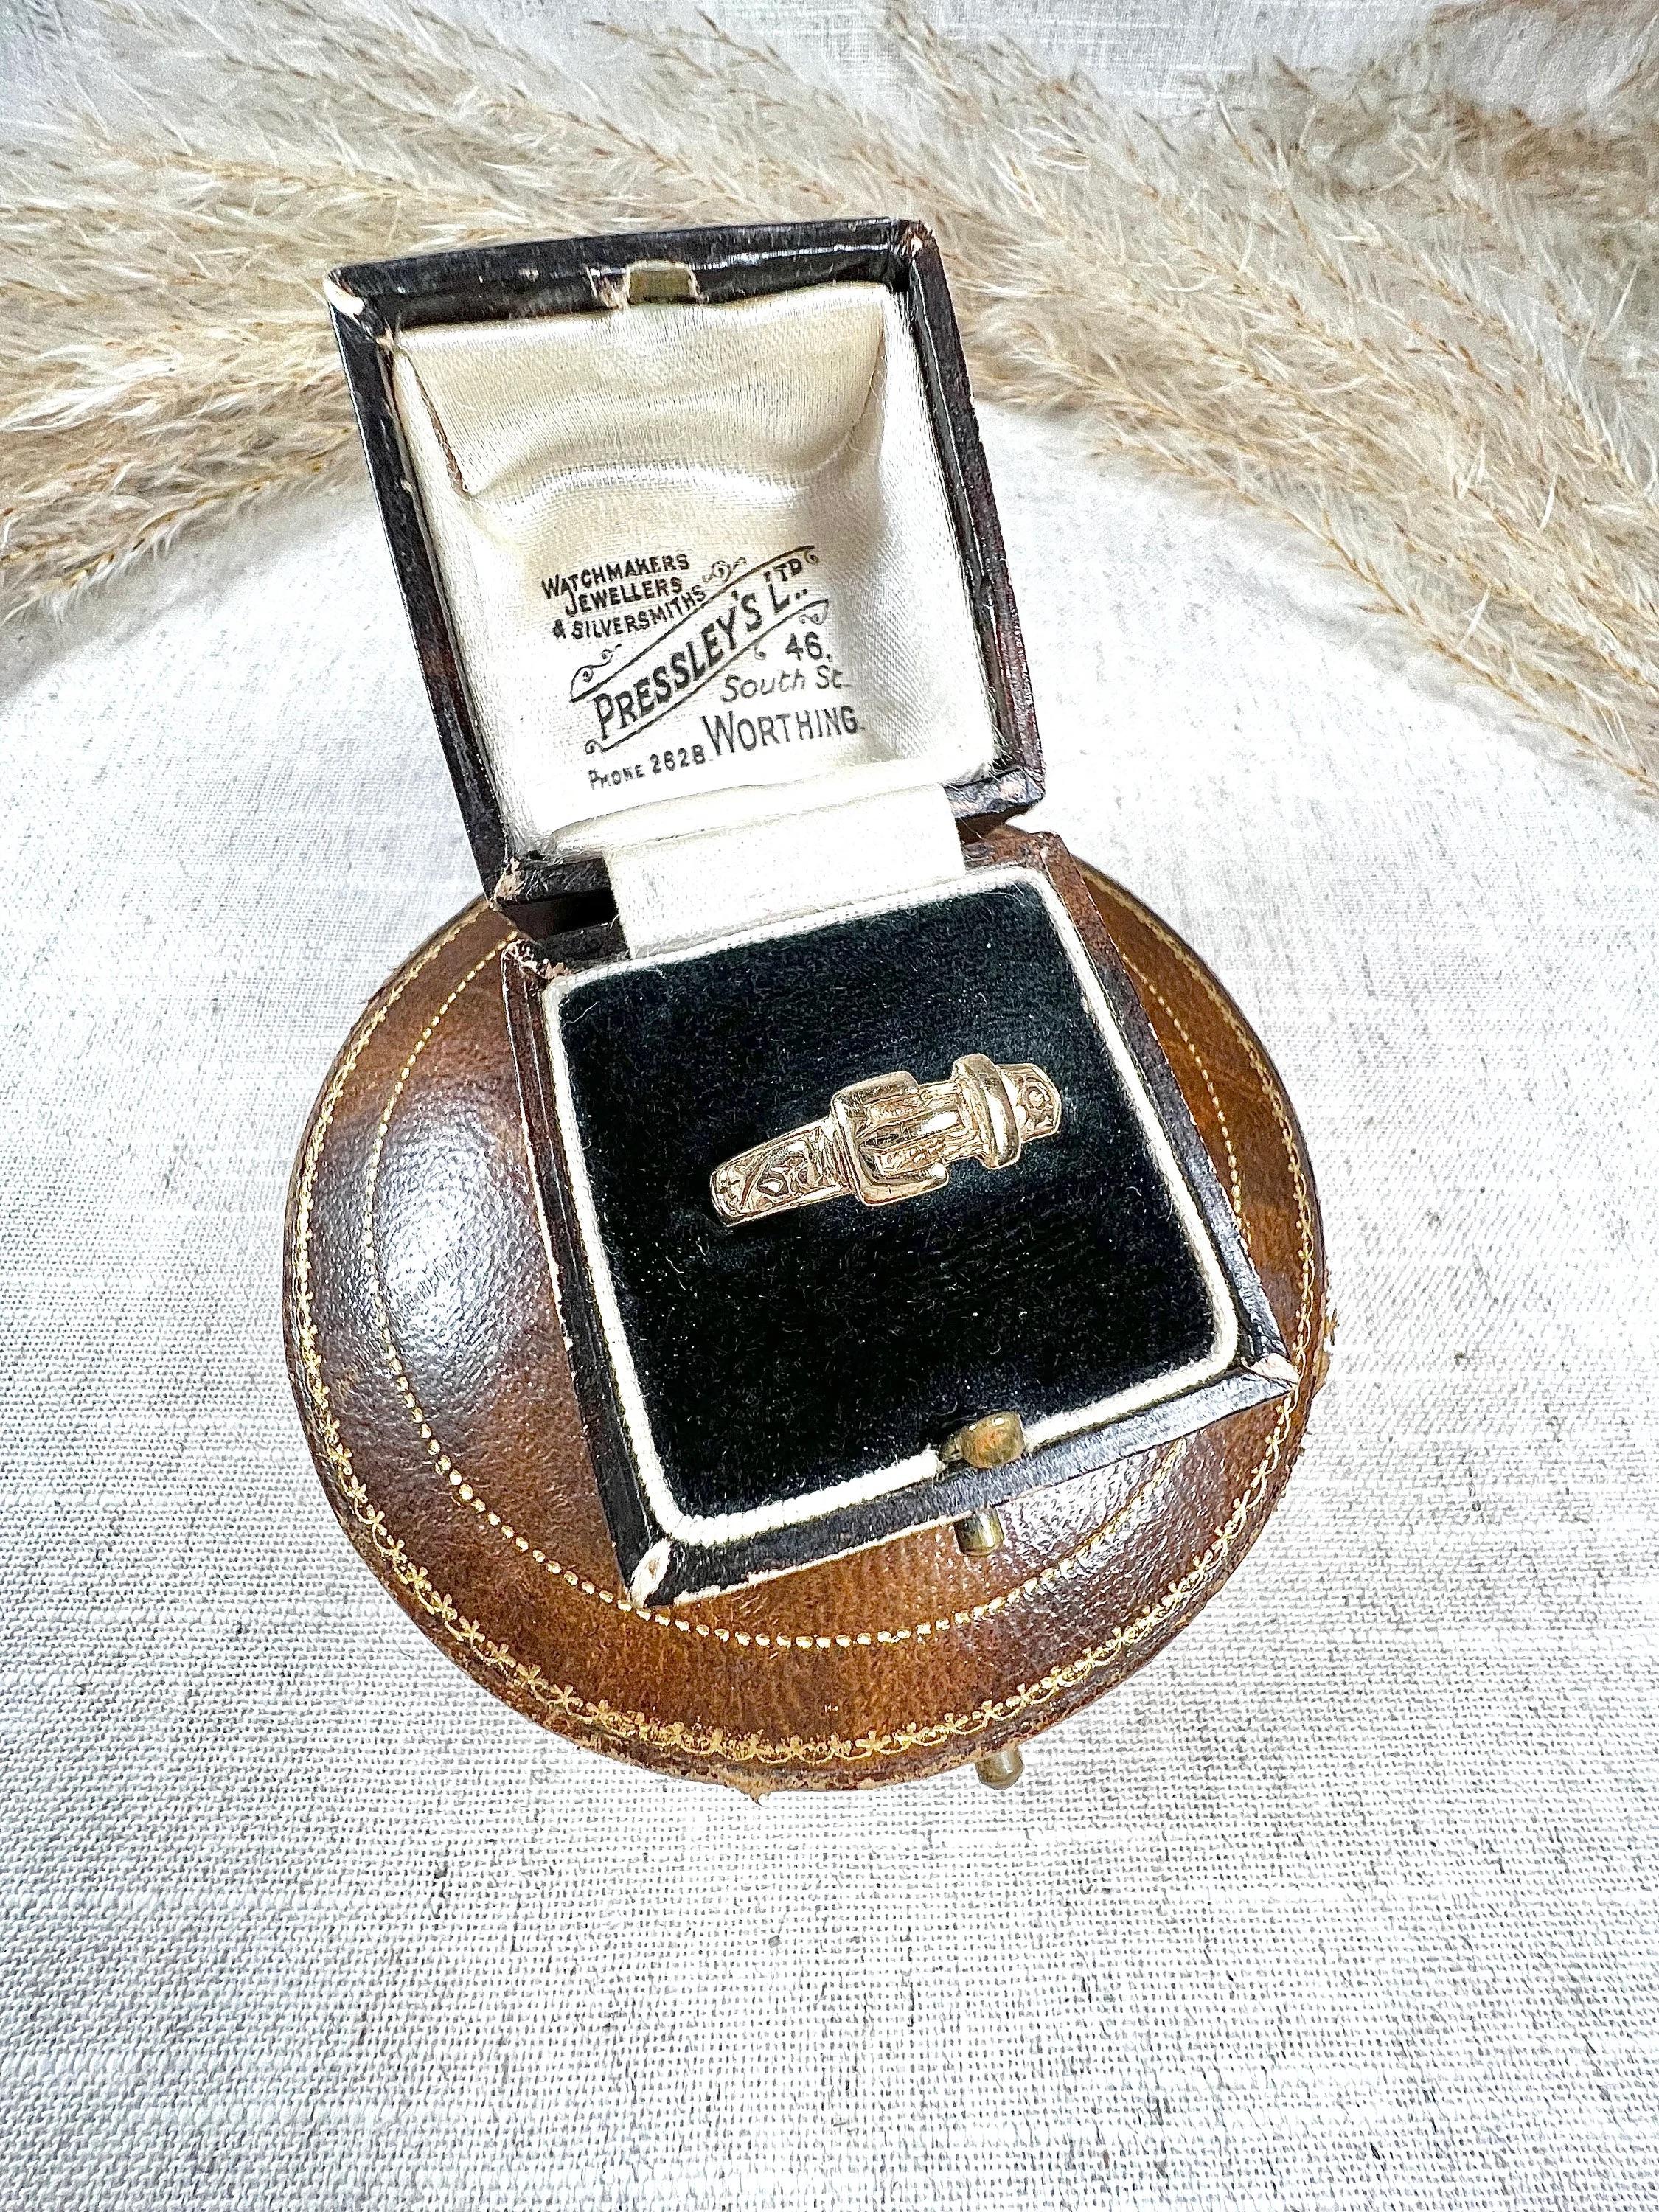 Vintage Buckle Ring 

9ct Yellow Gold Stamped 

Hallmarked London 1980

This exquisite vintage ring is crafted from 9ct pale yellow gold and features intricate engraved gold work that encircles the entire band. The design is reminiscent of a classic